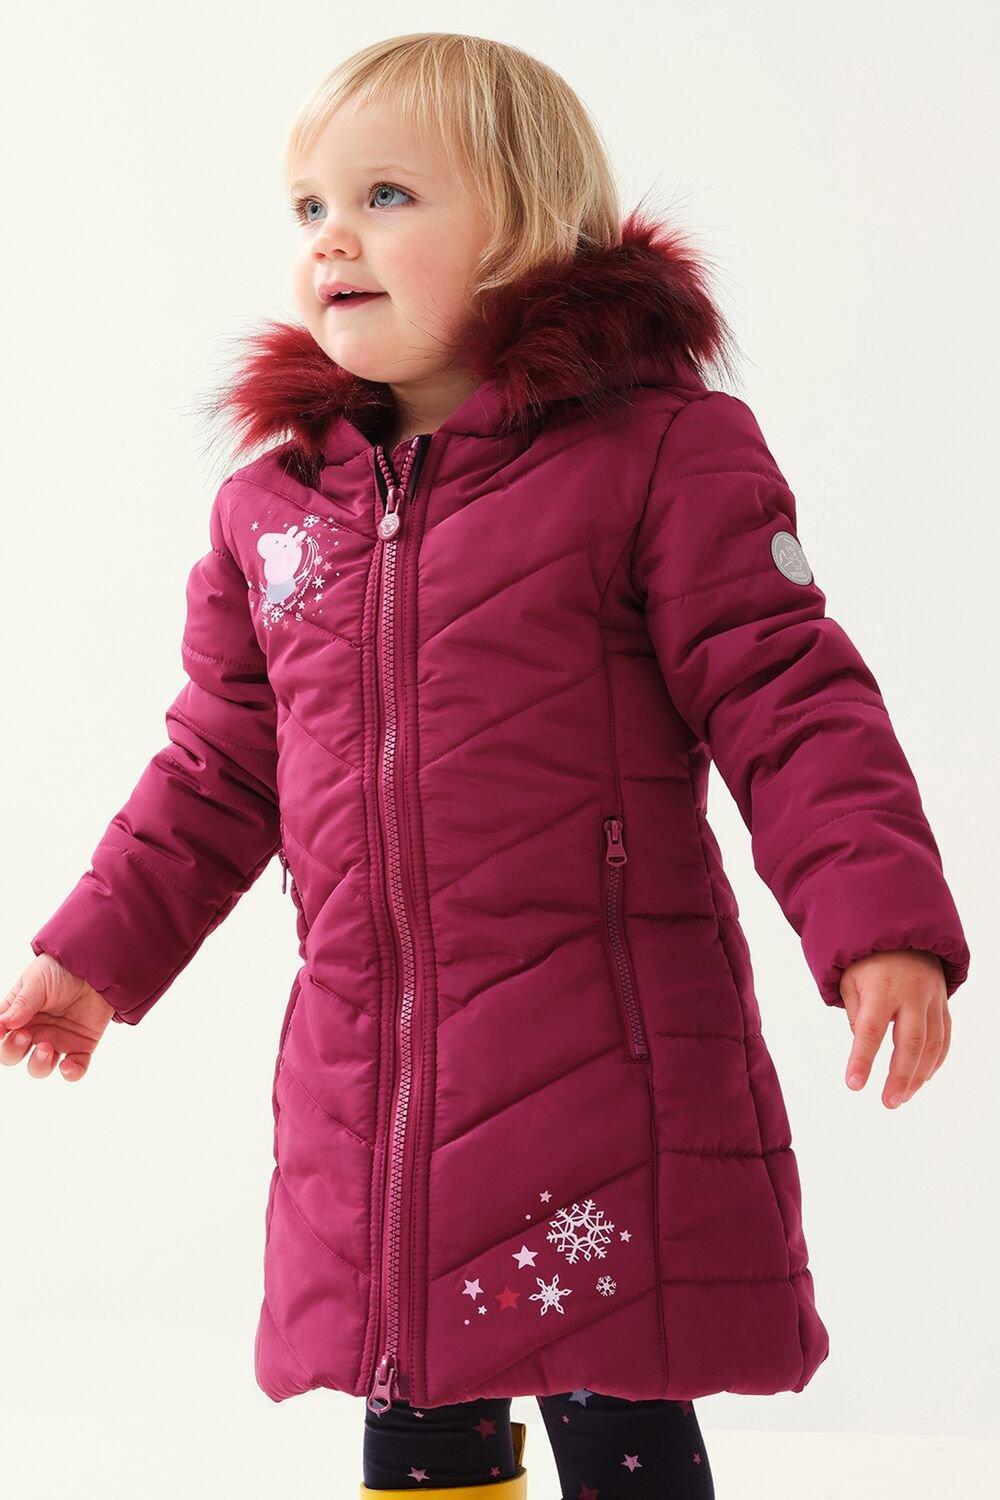 Hollister Girl Coats Discount Collection, 56% OFF | thebighousegroup.com